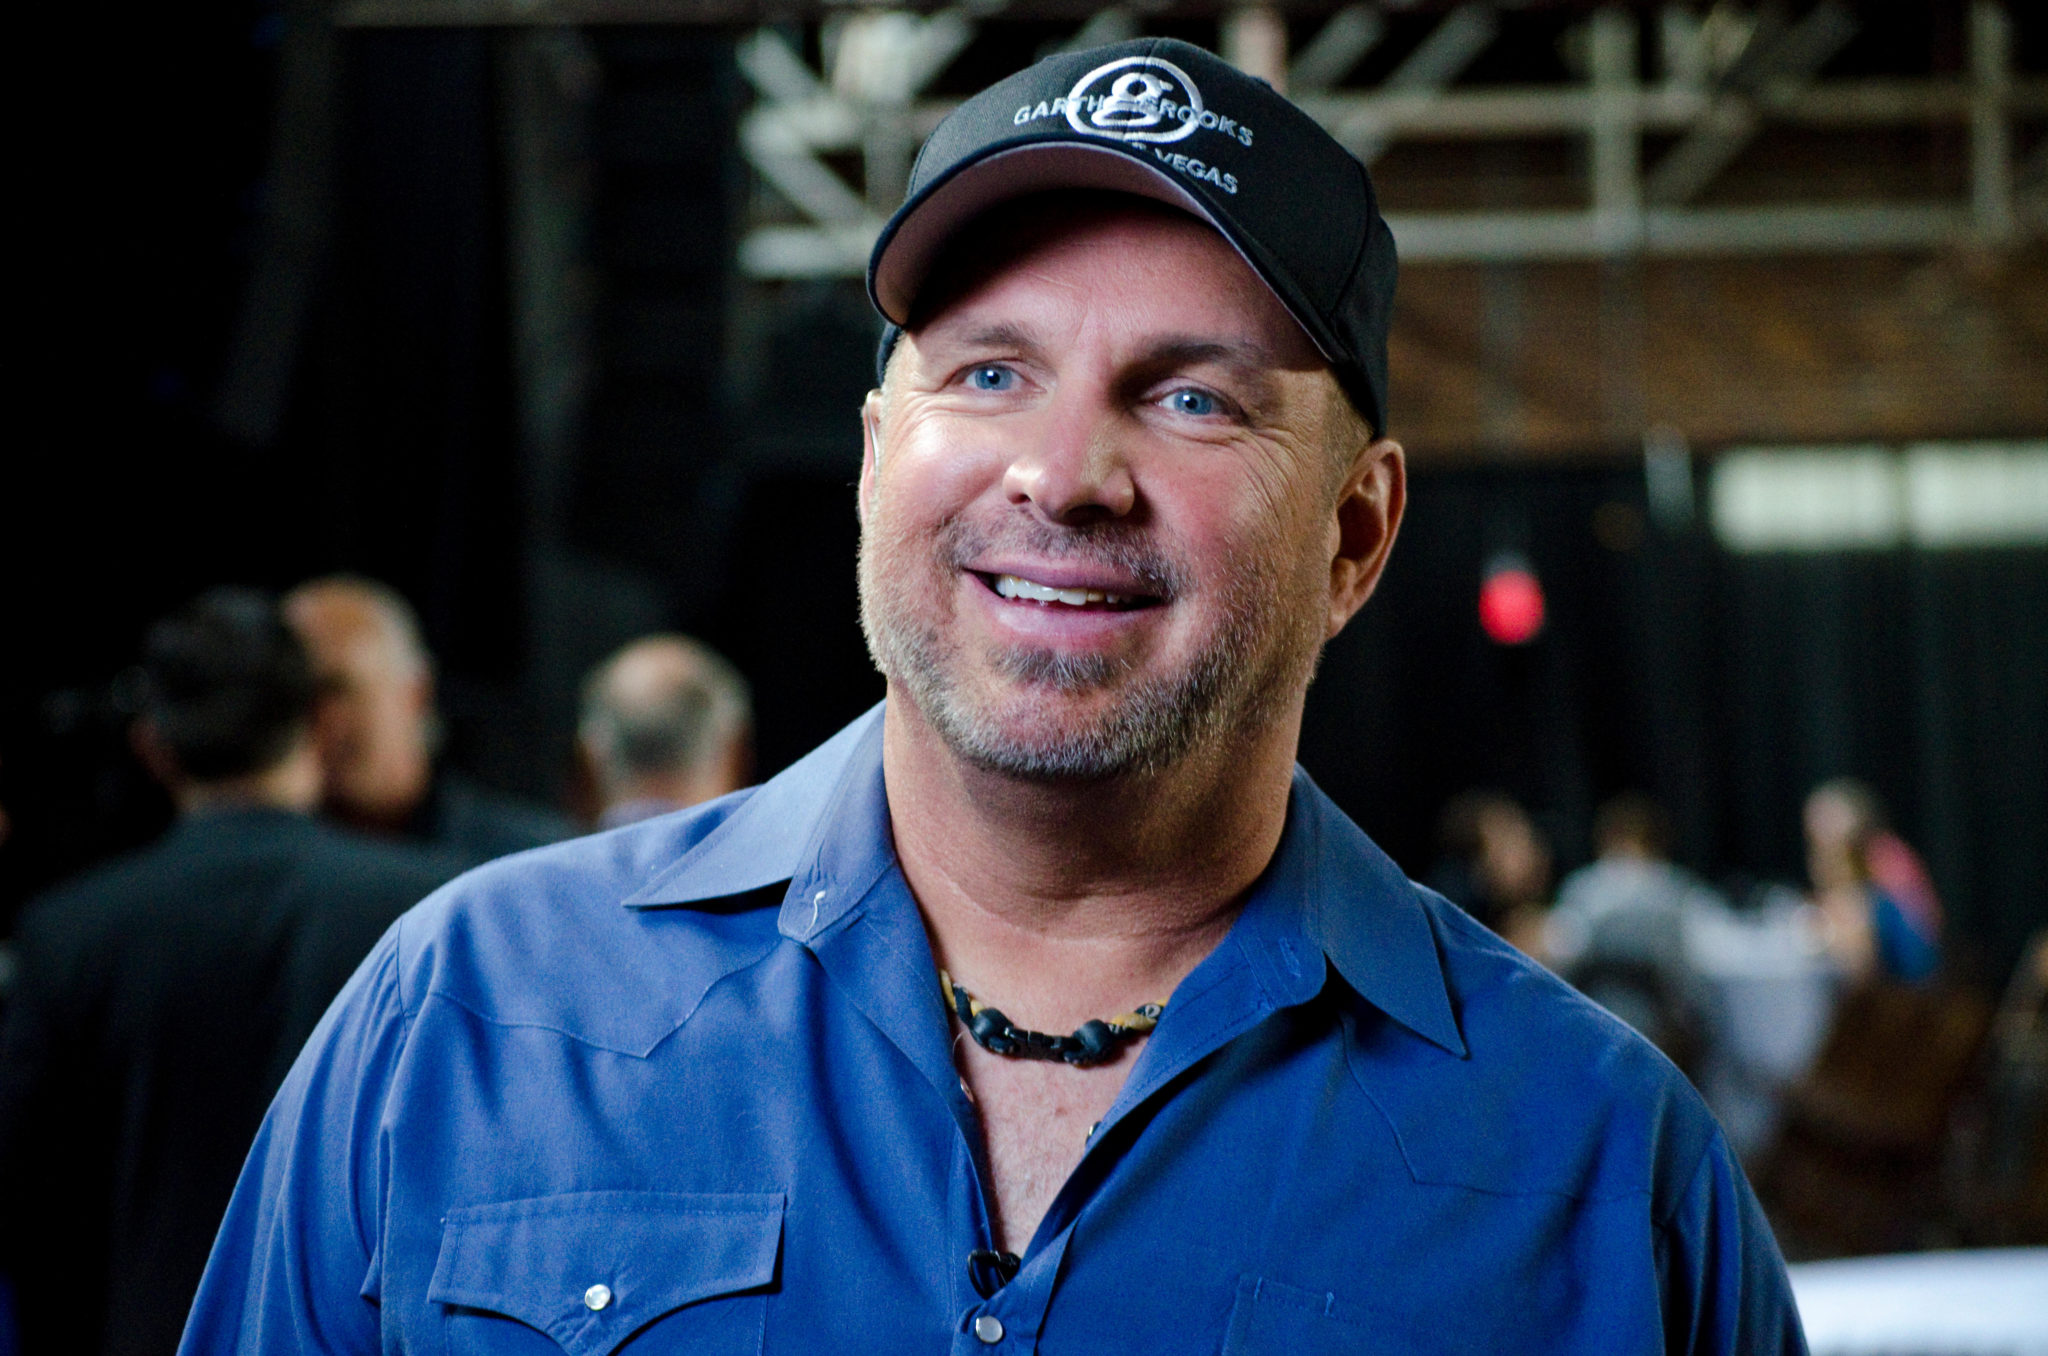 US singer Garth Brooks speaks at a news conference in Tennessee in July 2014